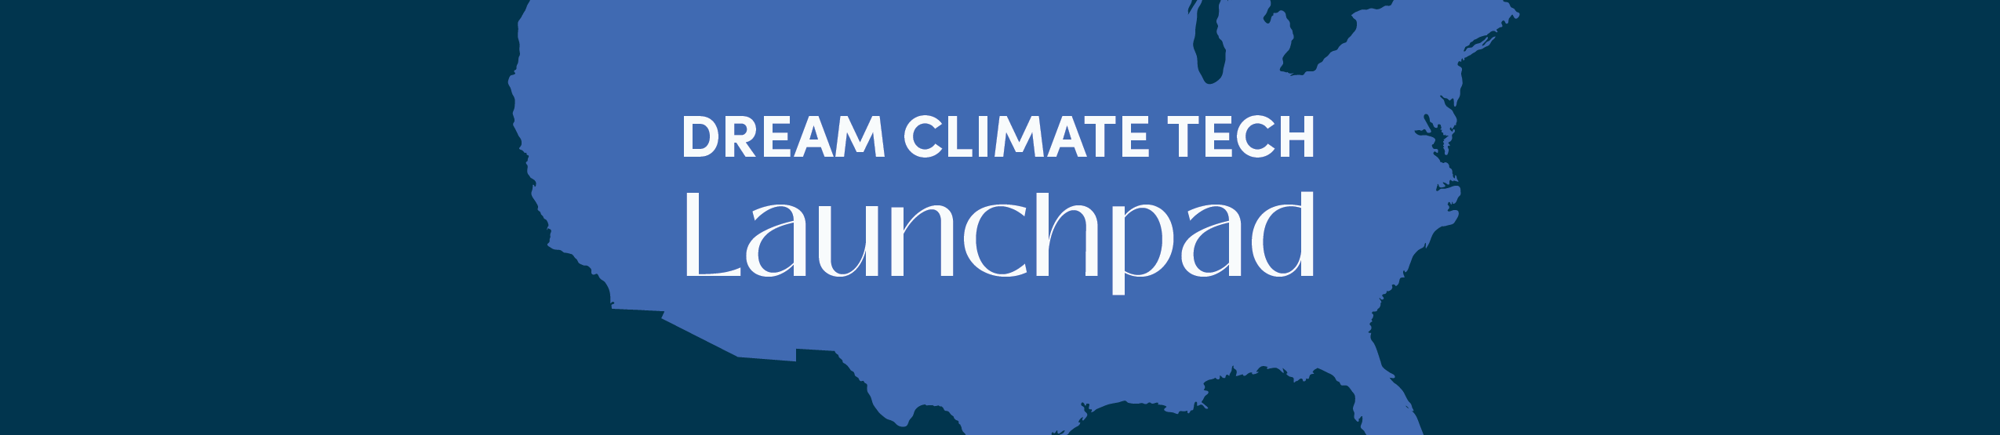 Dream Climate Tech Launchpad_Banner for Web